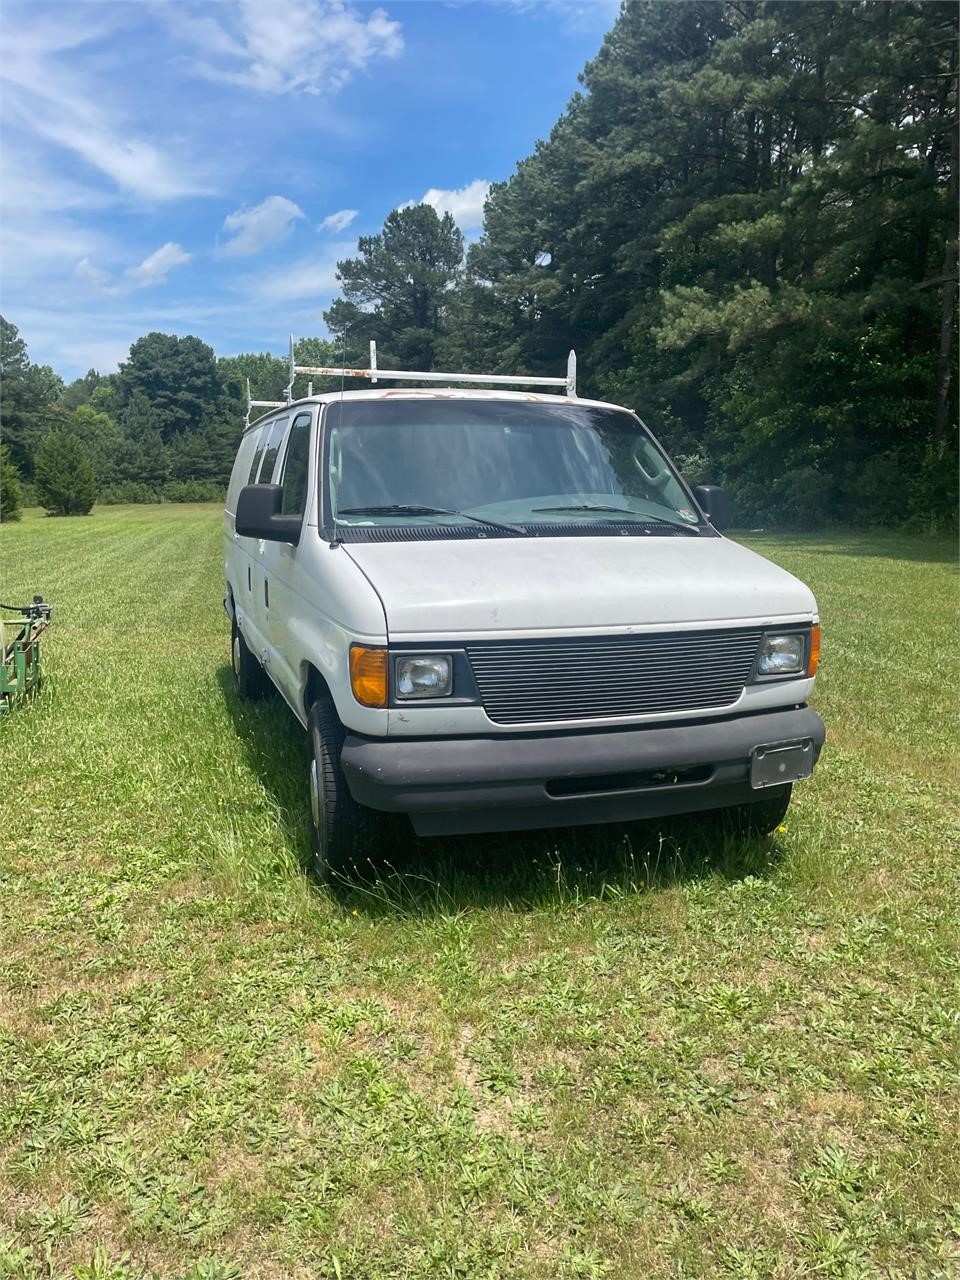 2001 Ford Project Work Van